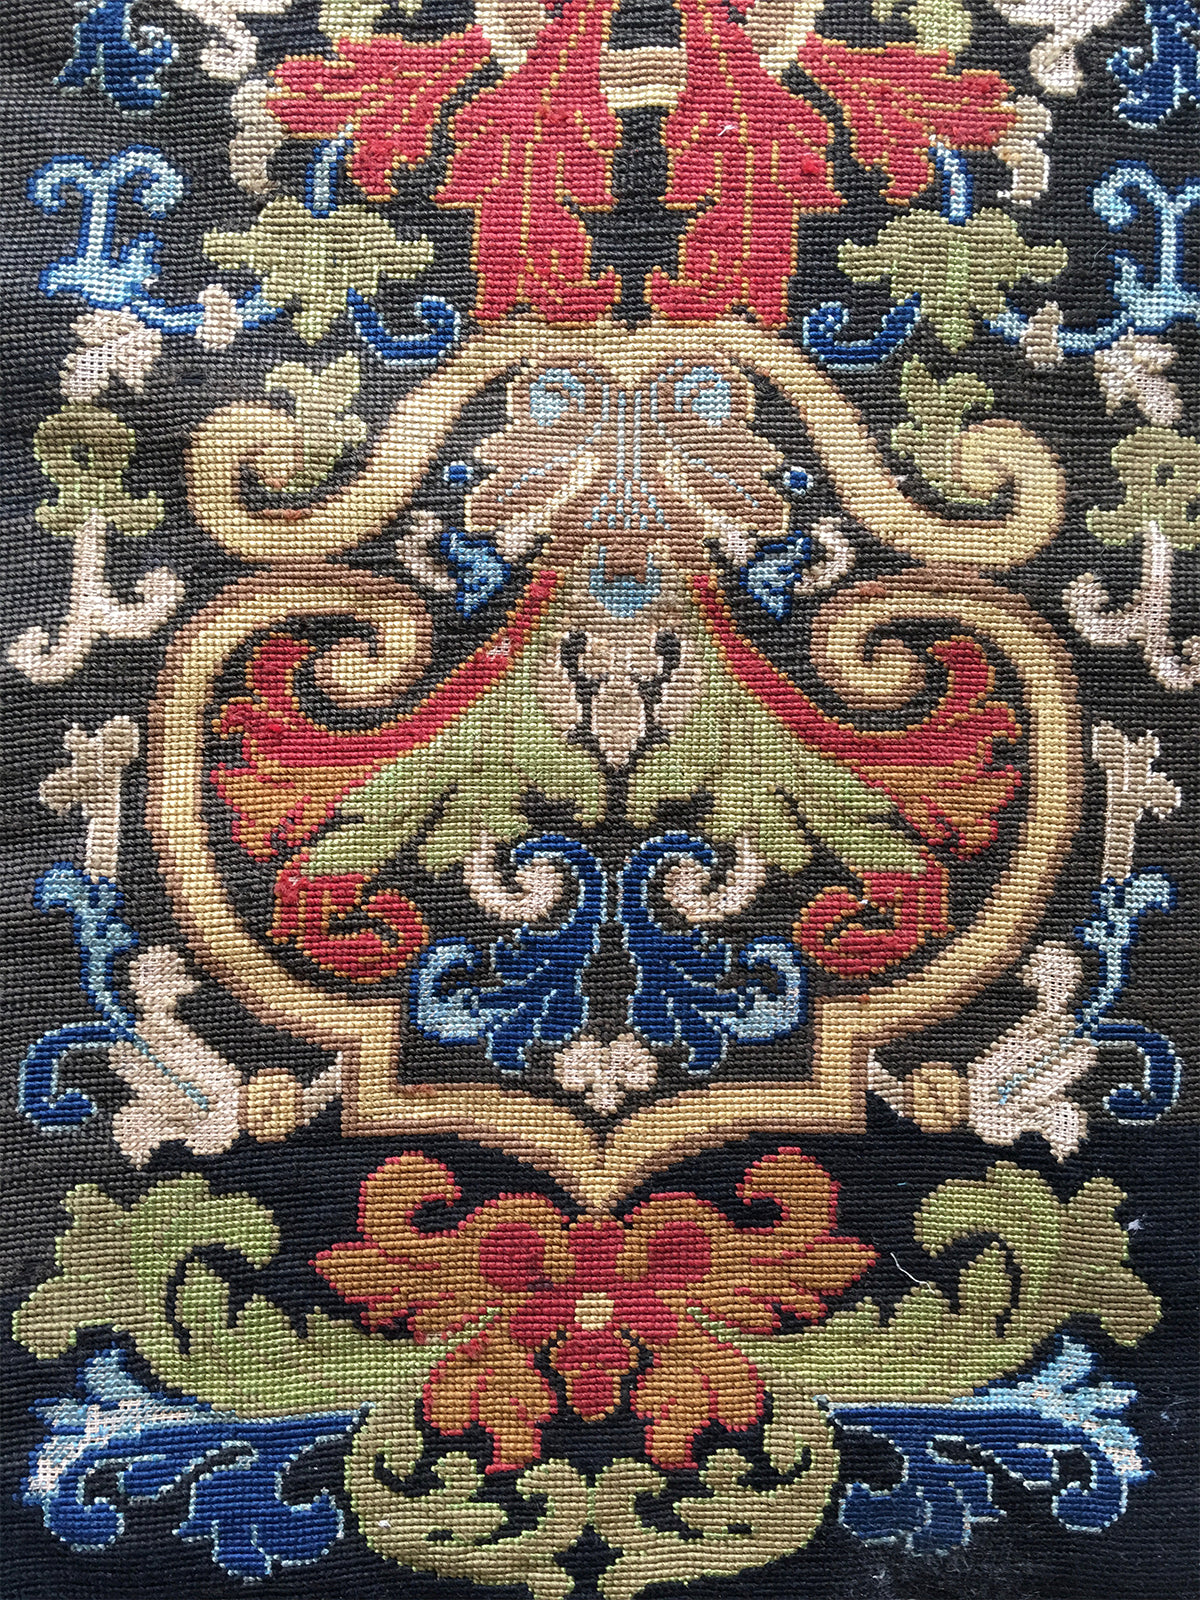 Antique French Needlepoint Panel 38" x 13.5" Wall Hanging, or Make 2 Throw Pillows, Napoleon III